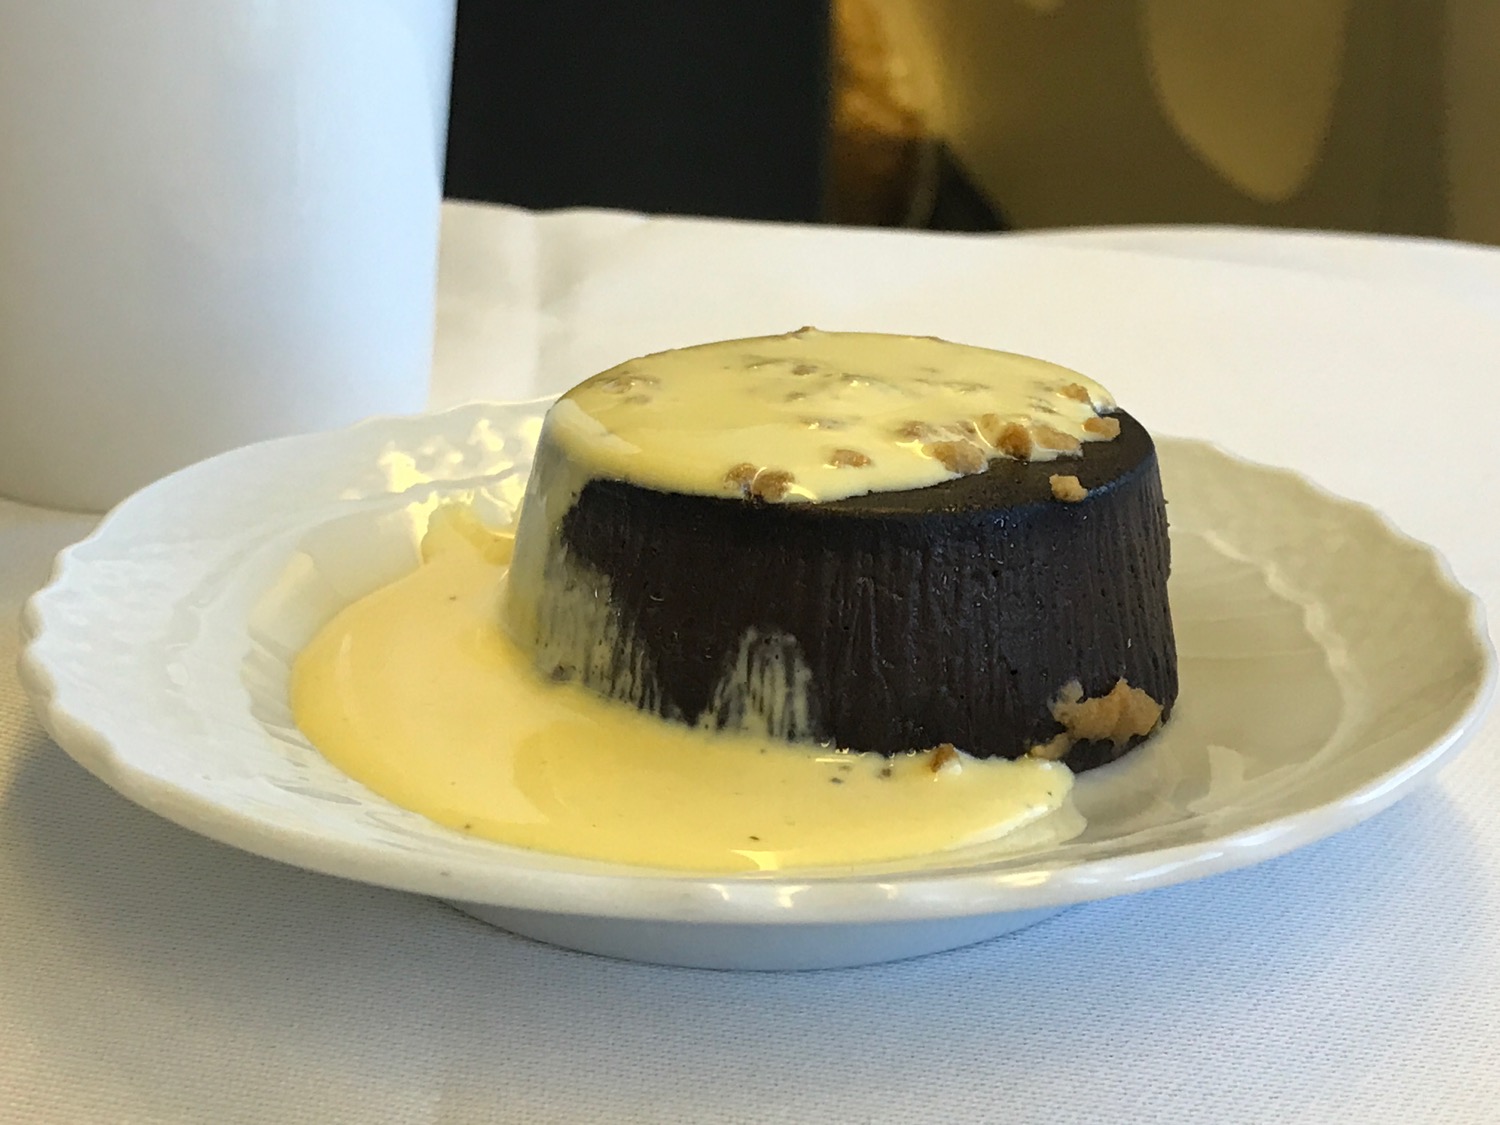 a chocolate pudding with a white sauce on a white plate